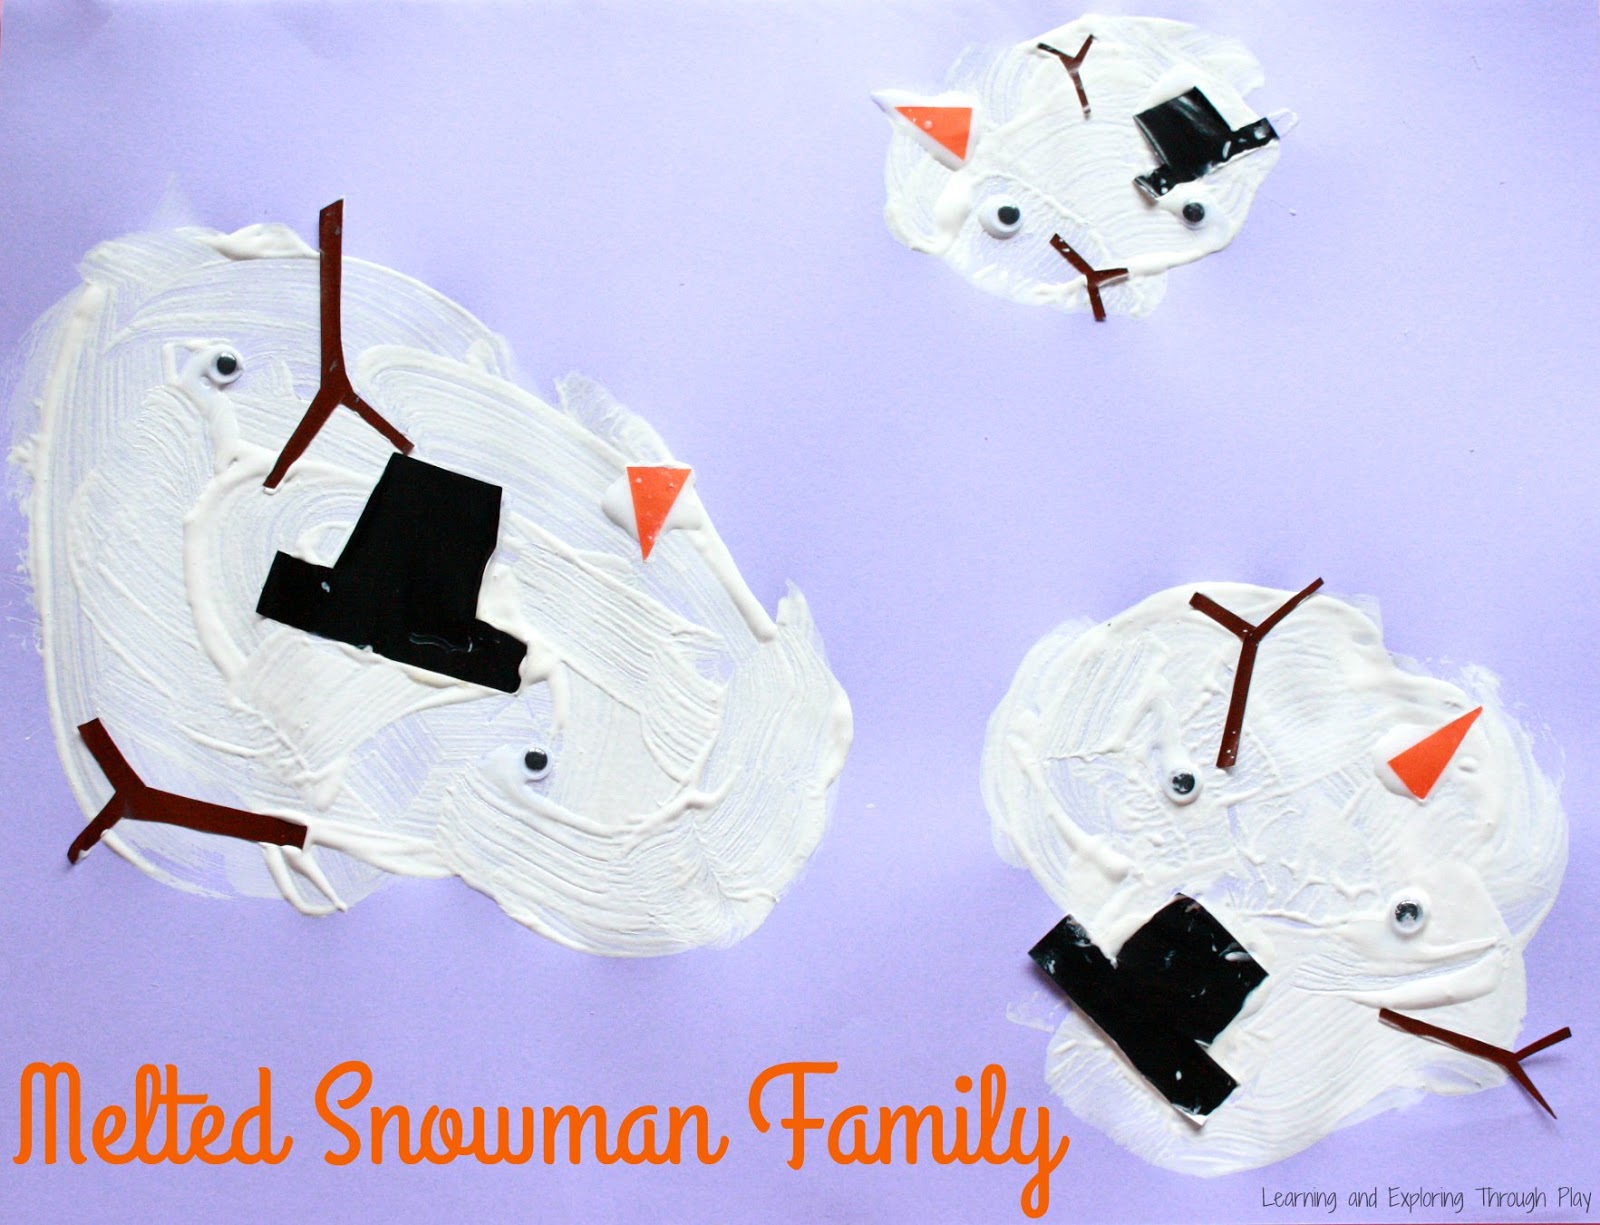 Learning and Exploring Through Play: Melted Snowman Painting Craft